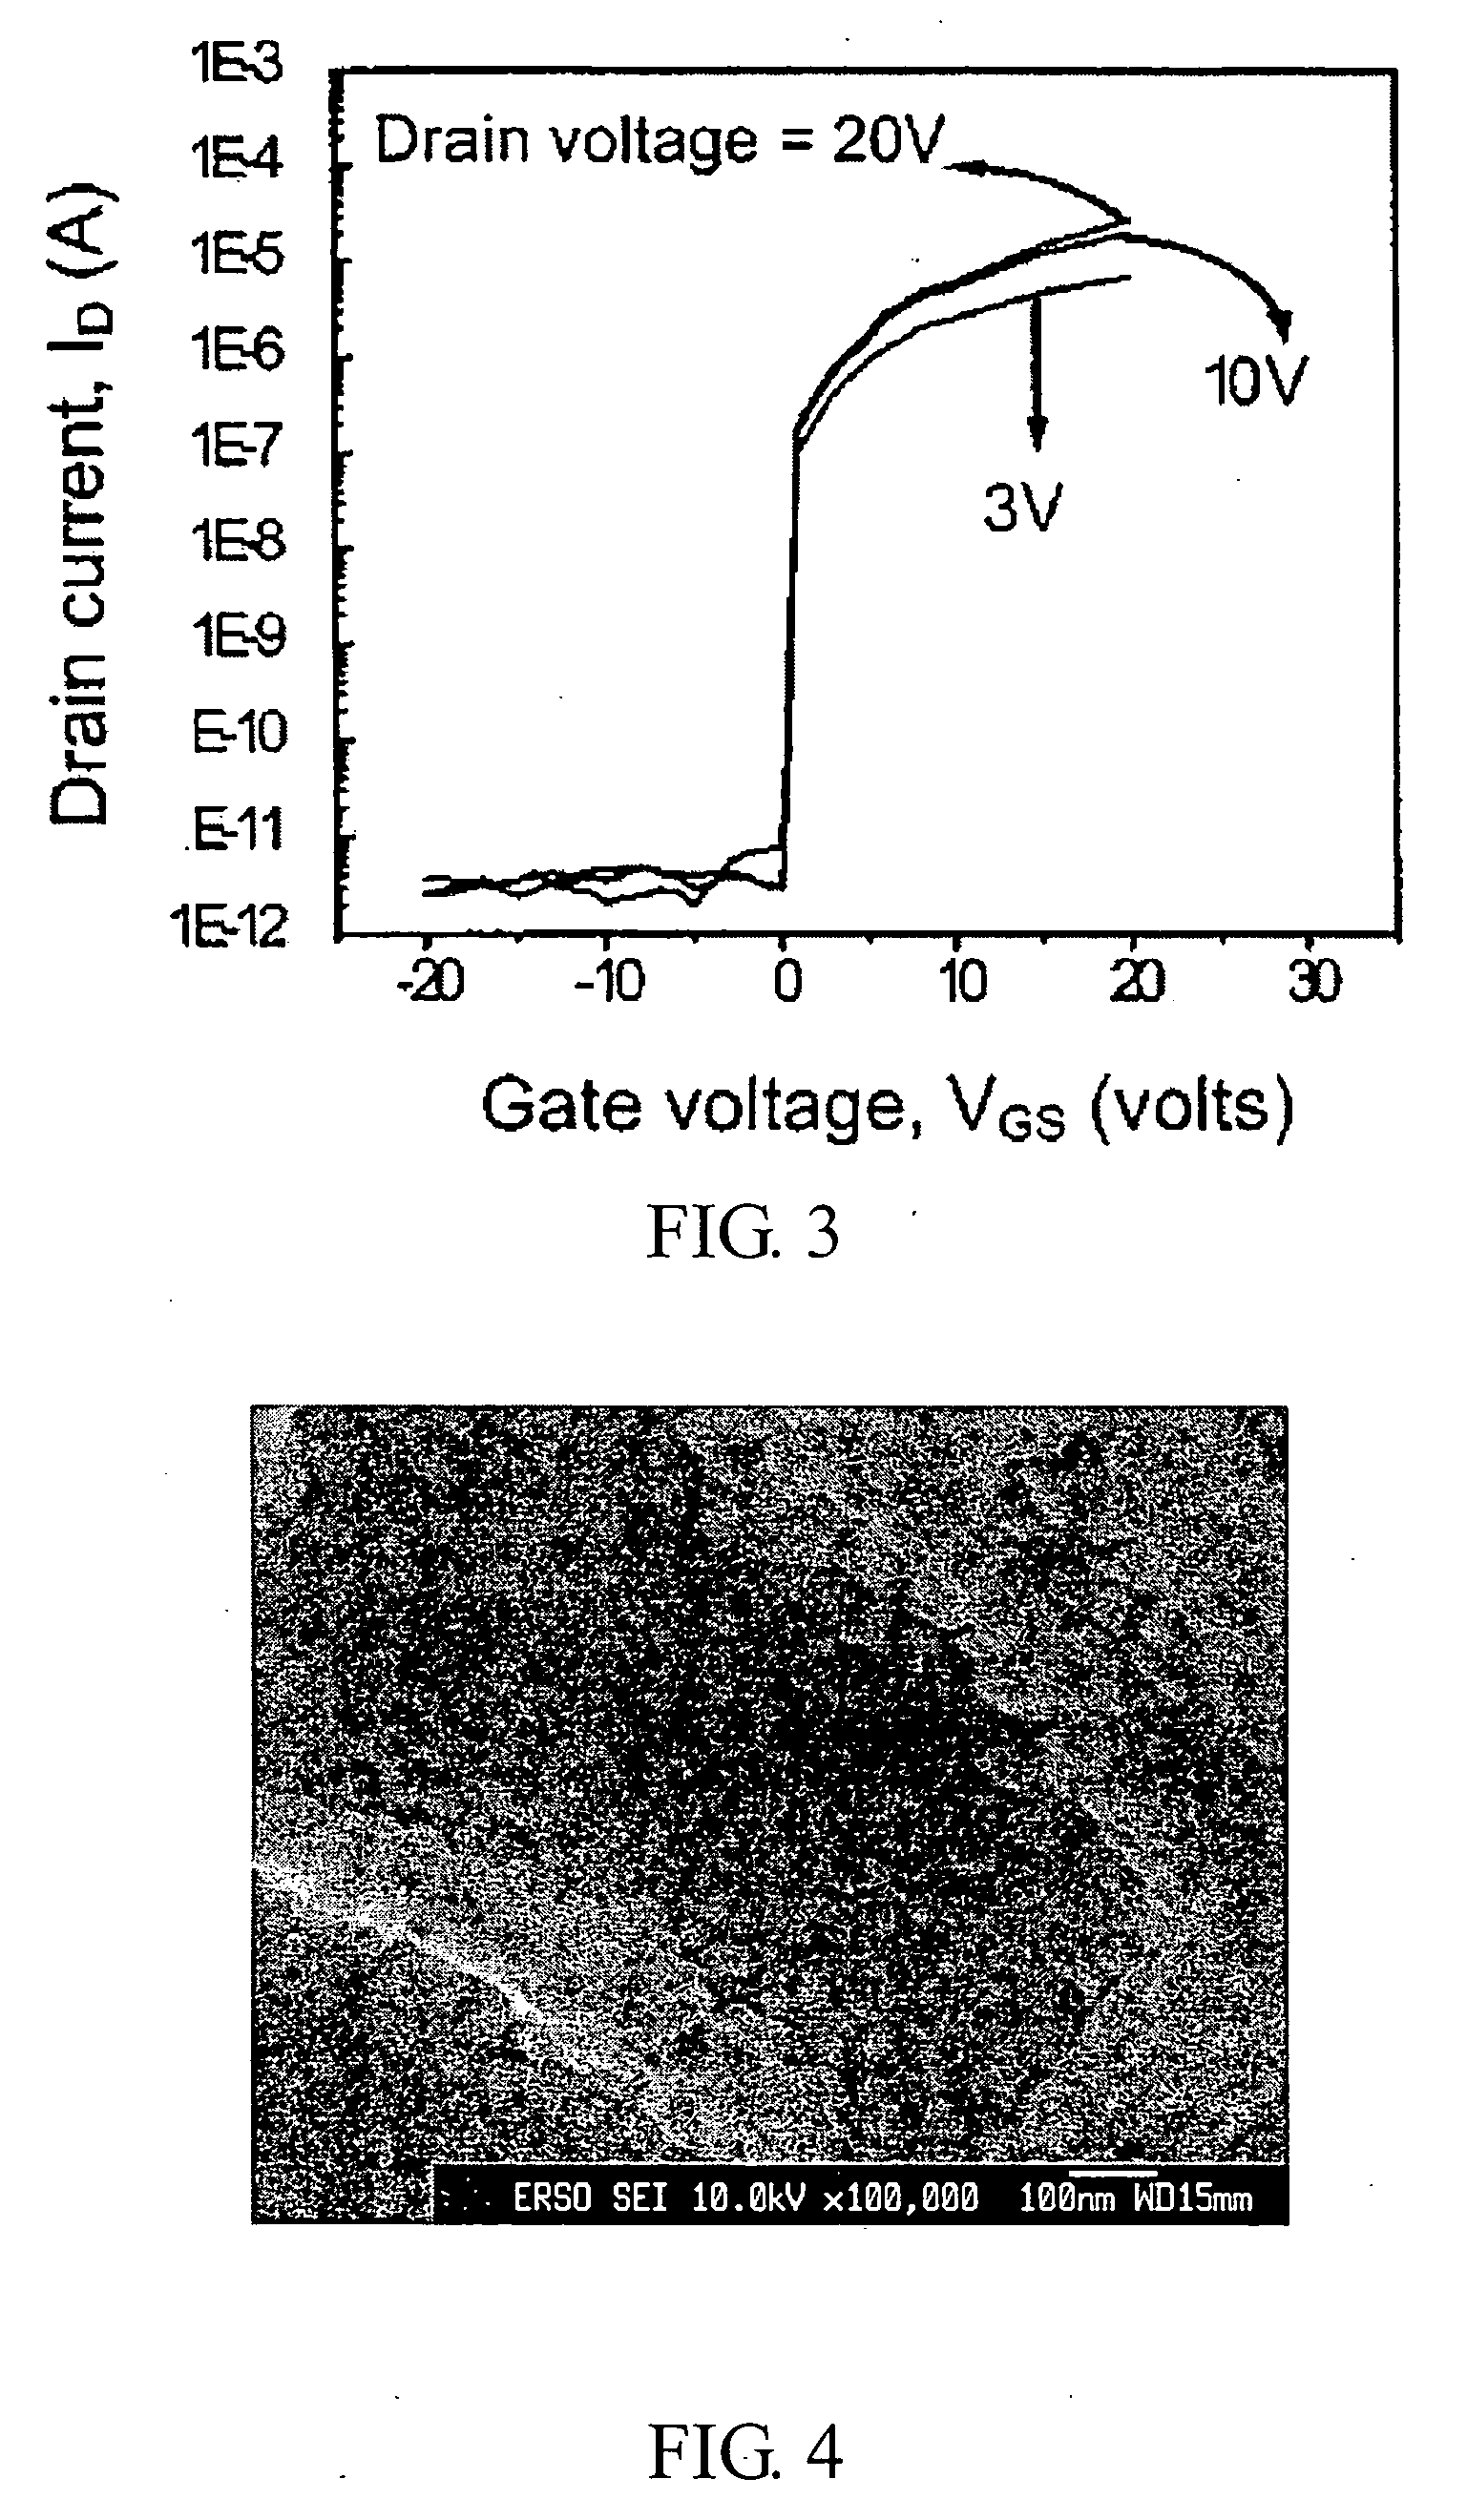 Compound semiconductor material and method for forming an active layer of a thin film transistor device